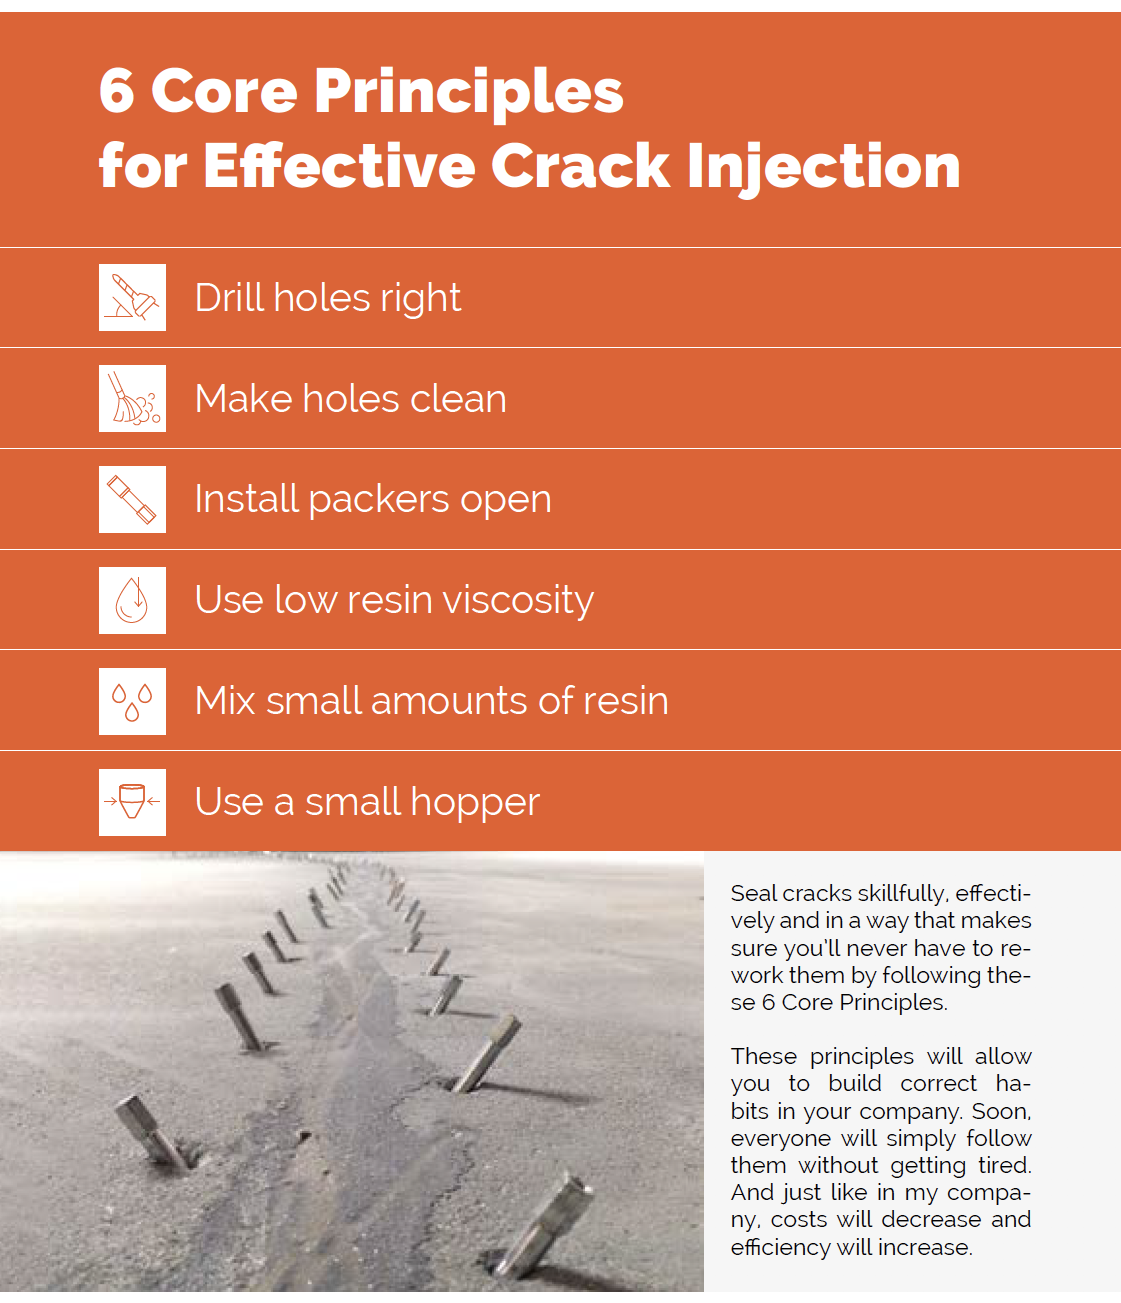 6 core principles for effective crack injection